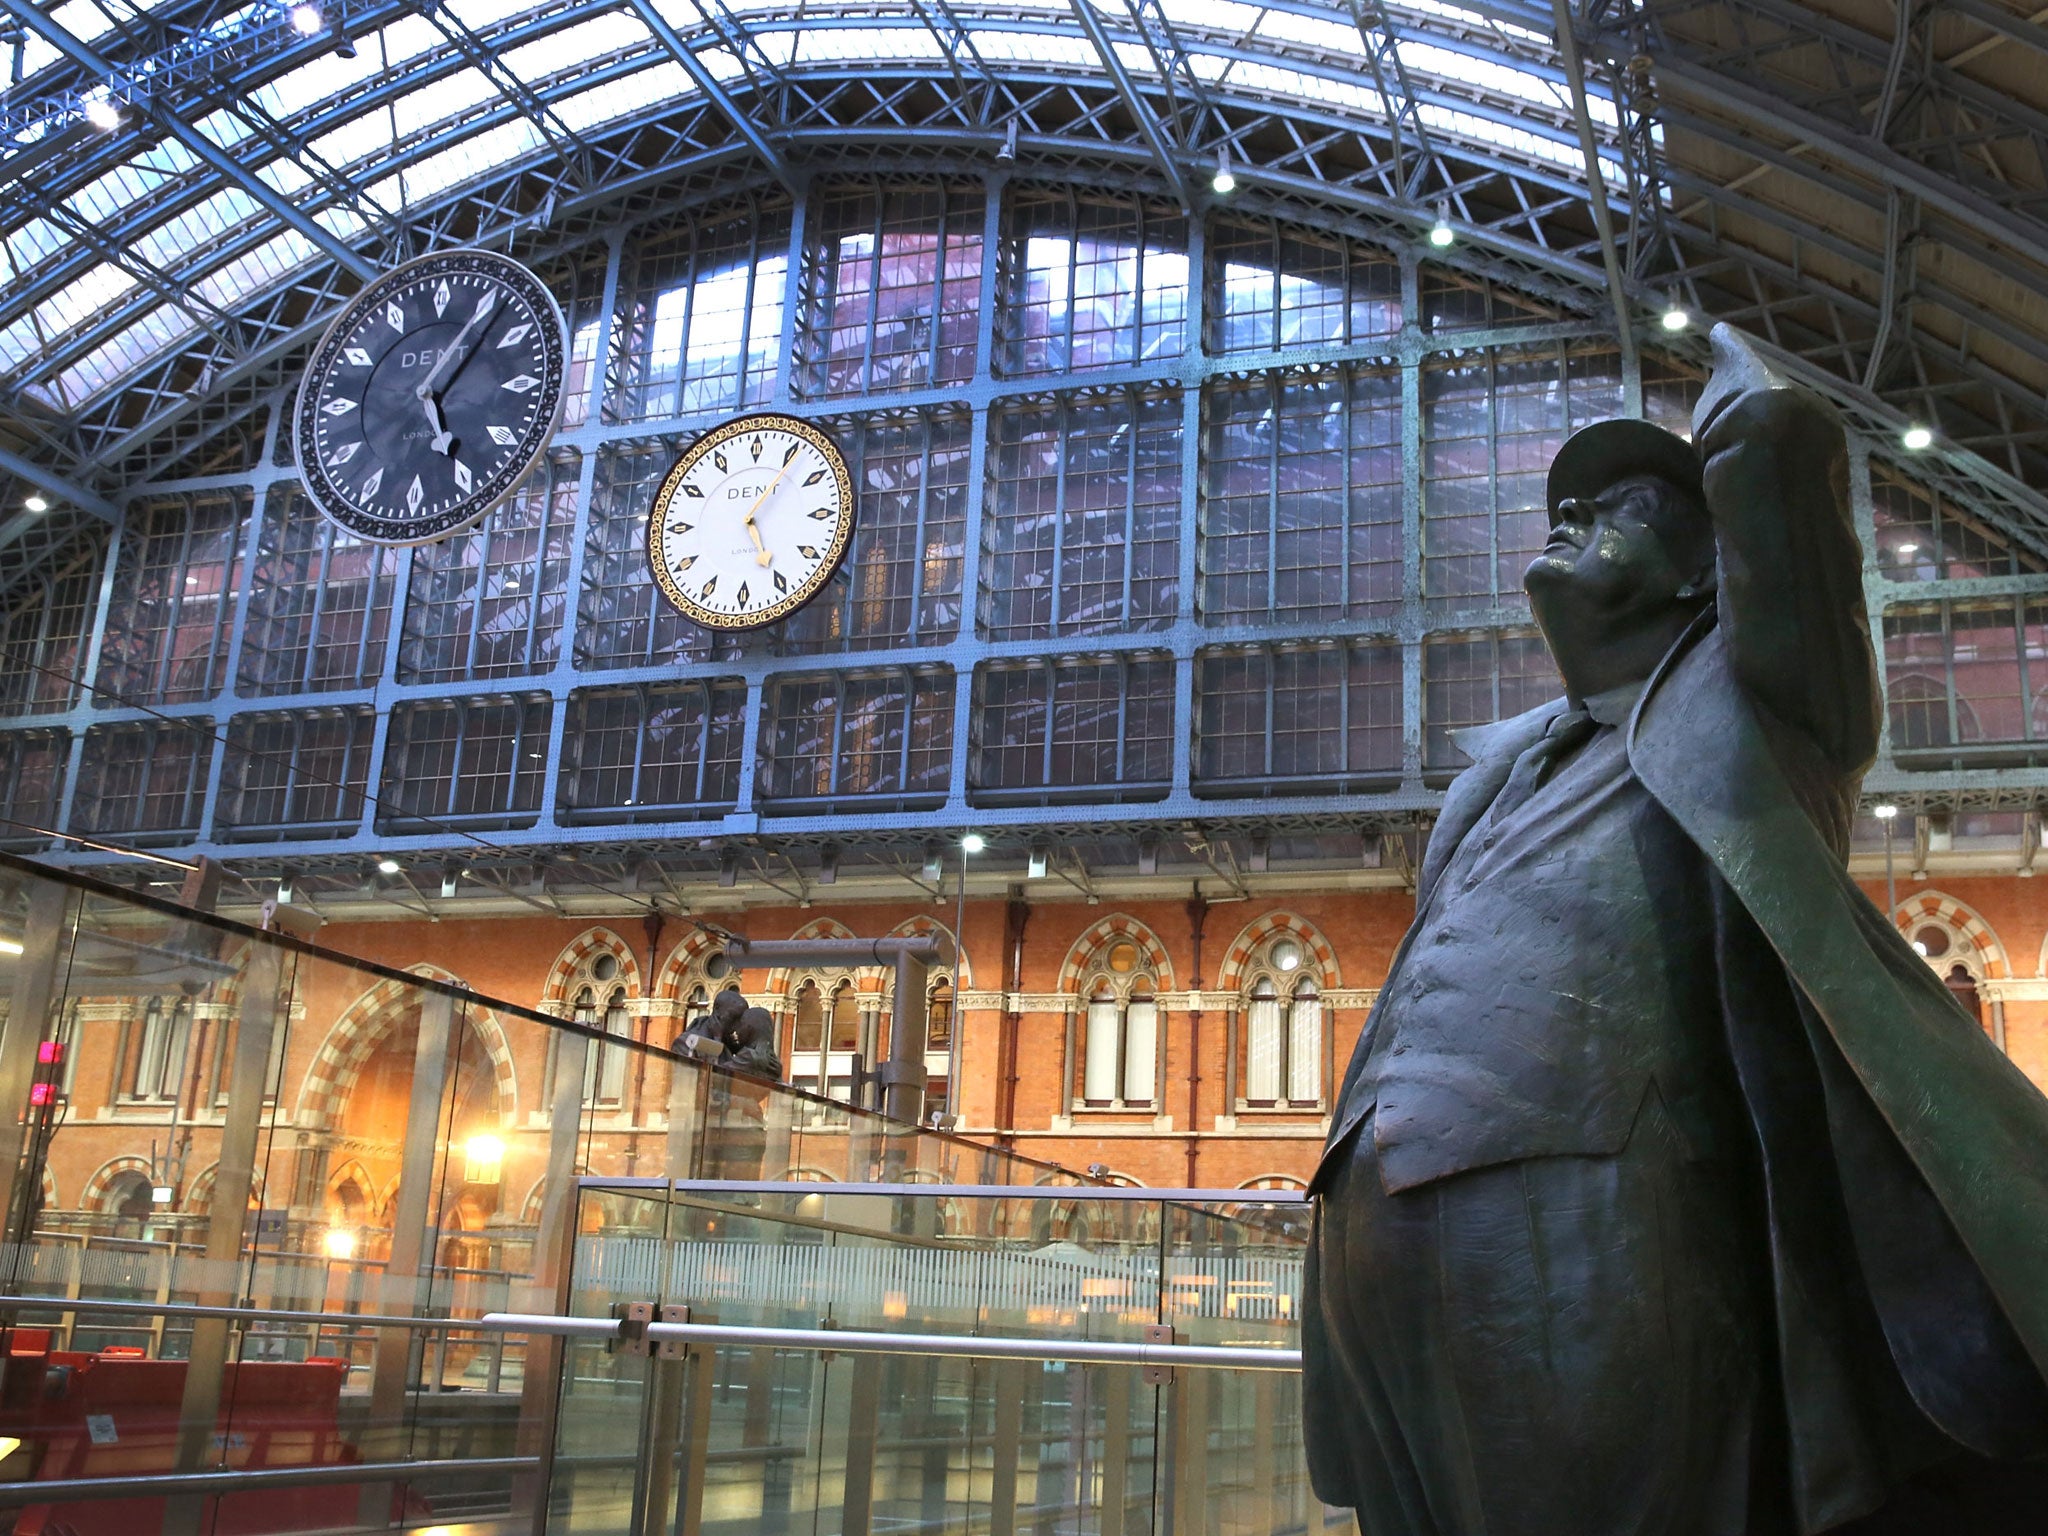 The disputed incident happened at St Pancras station